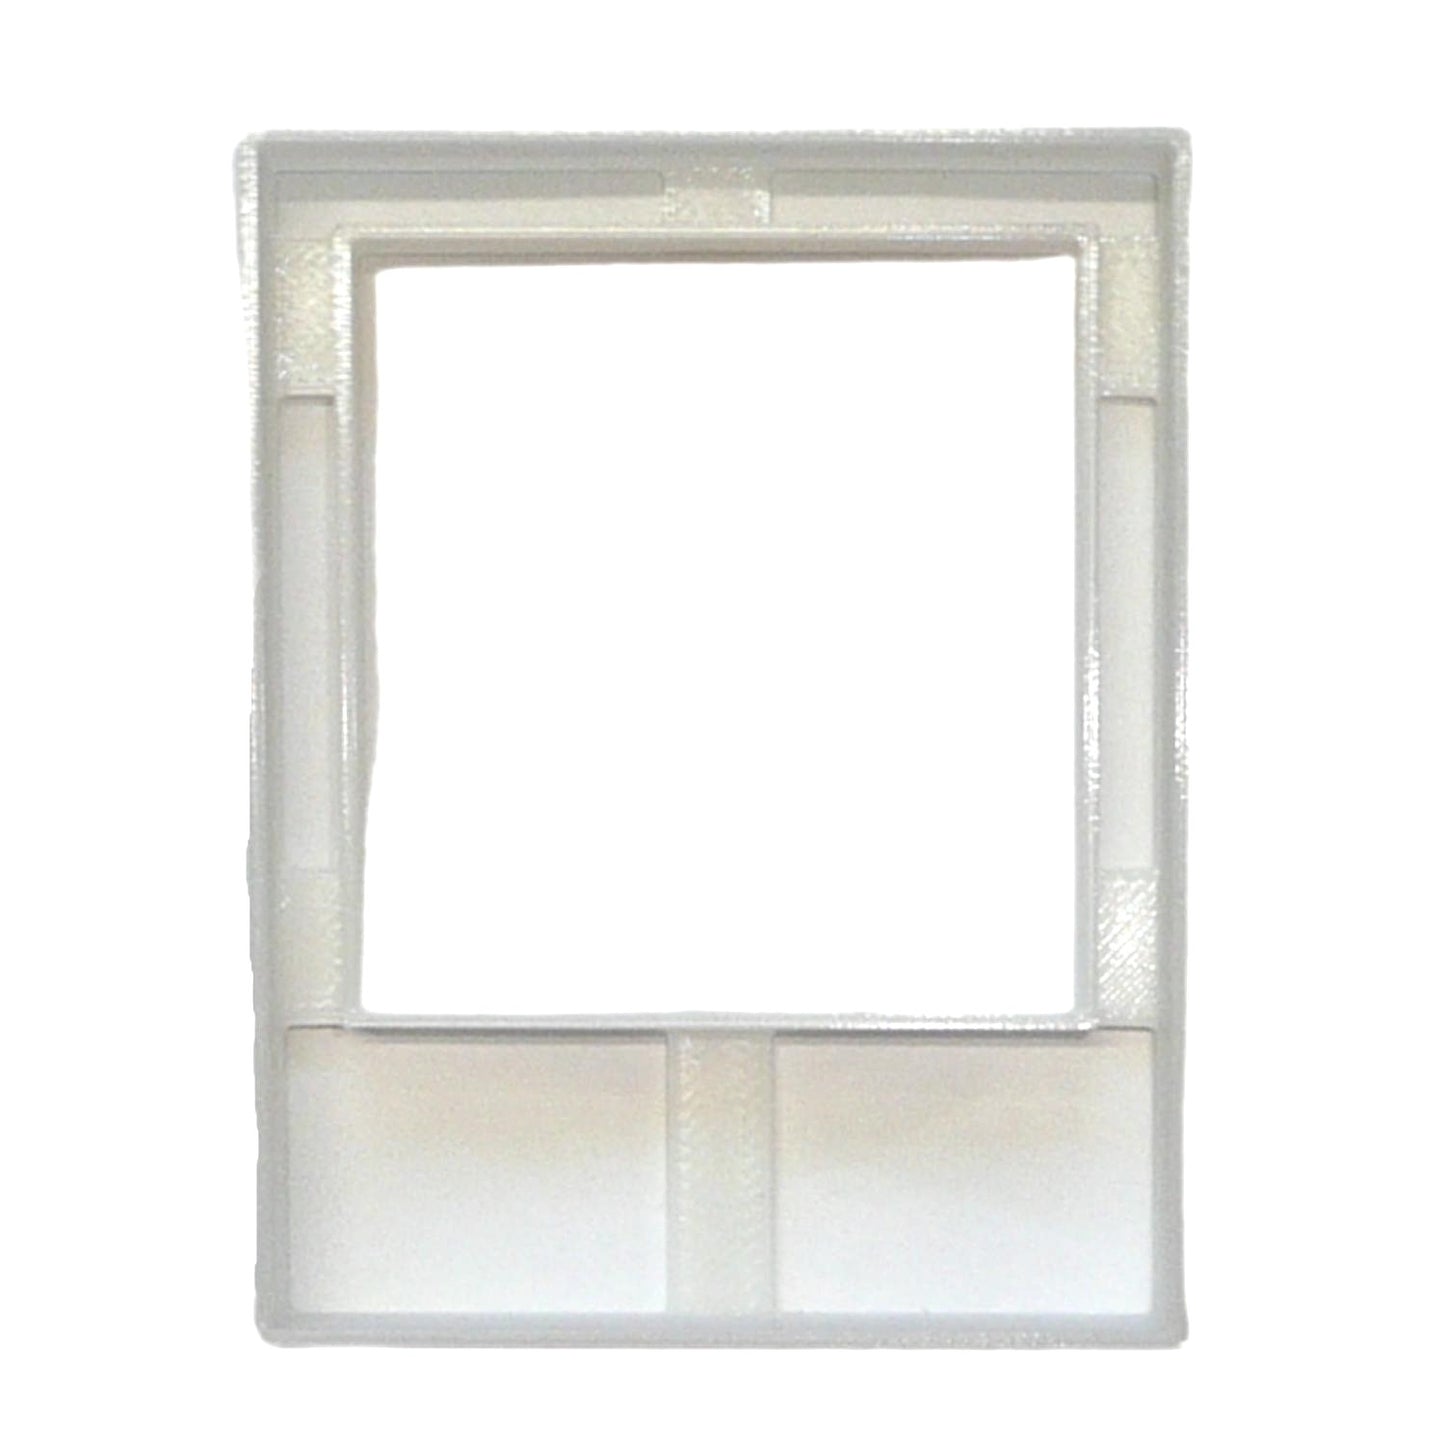 Polaroid Film Photograph Frame Cookie Cutter Made in USA PR4819